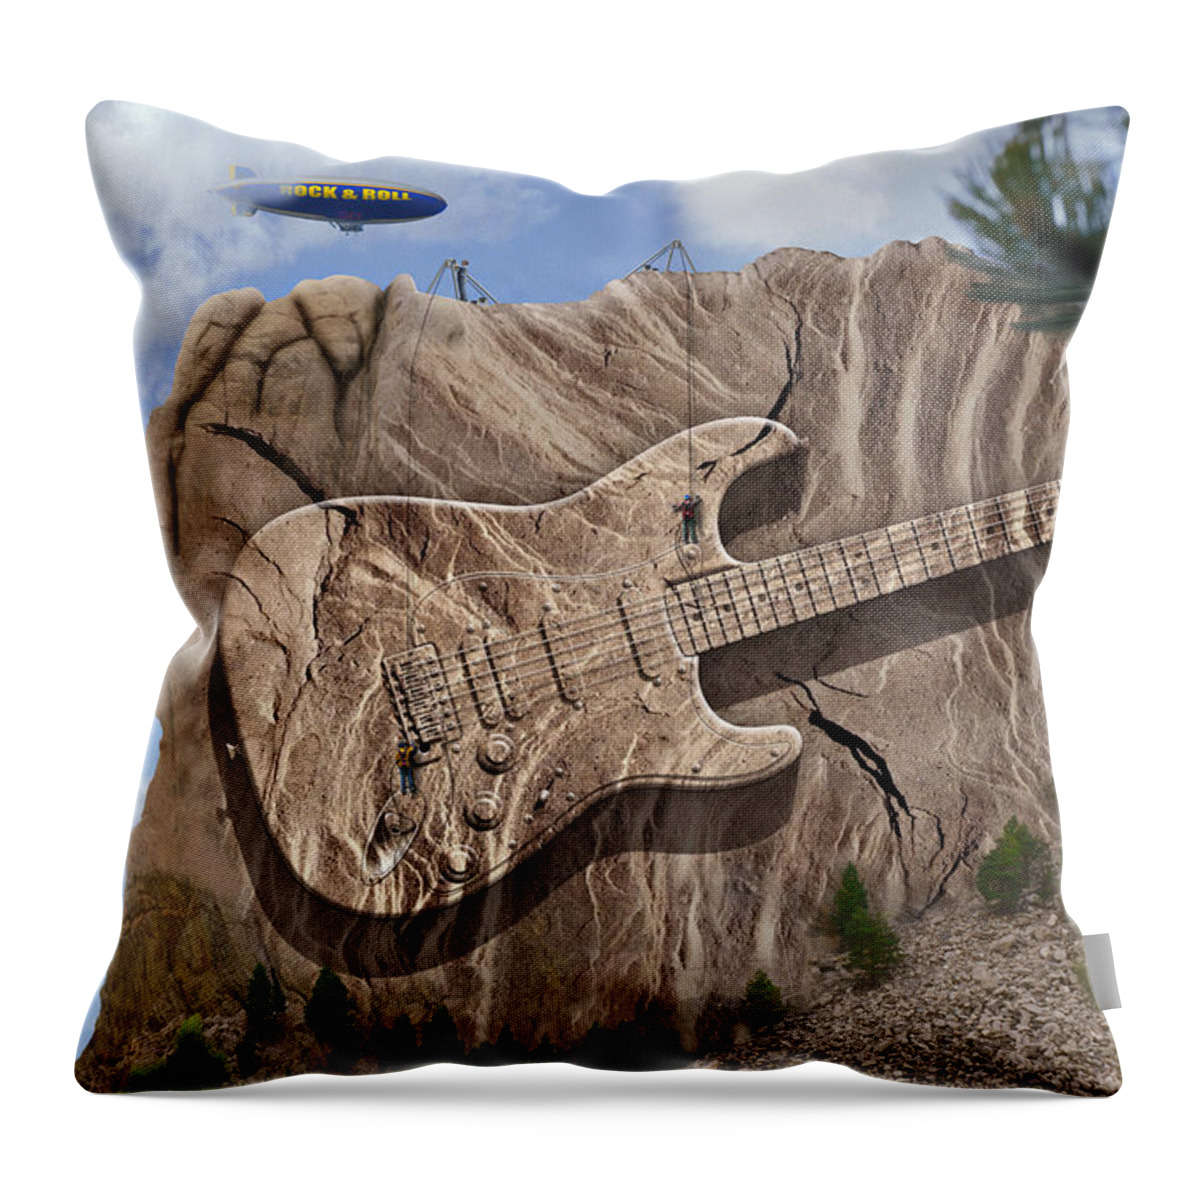 Surrealism Throw Pillow featuring the photograph Rock and Roll Park 2 by Mike McGlothlen